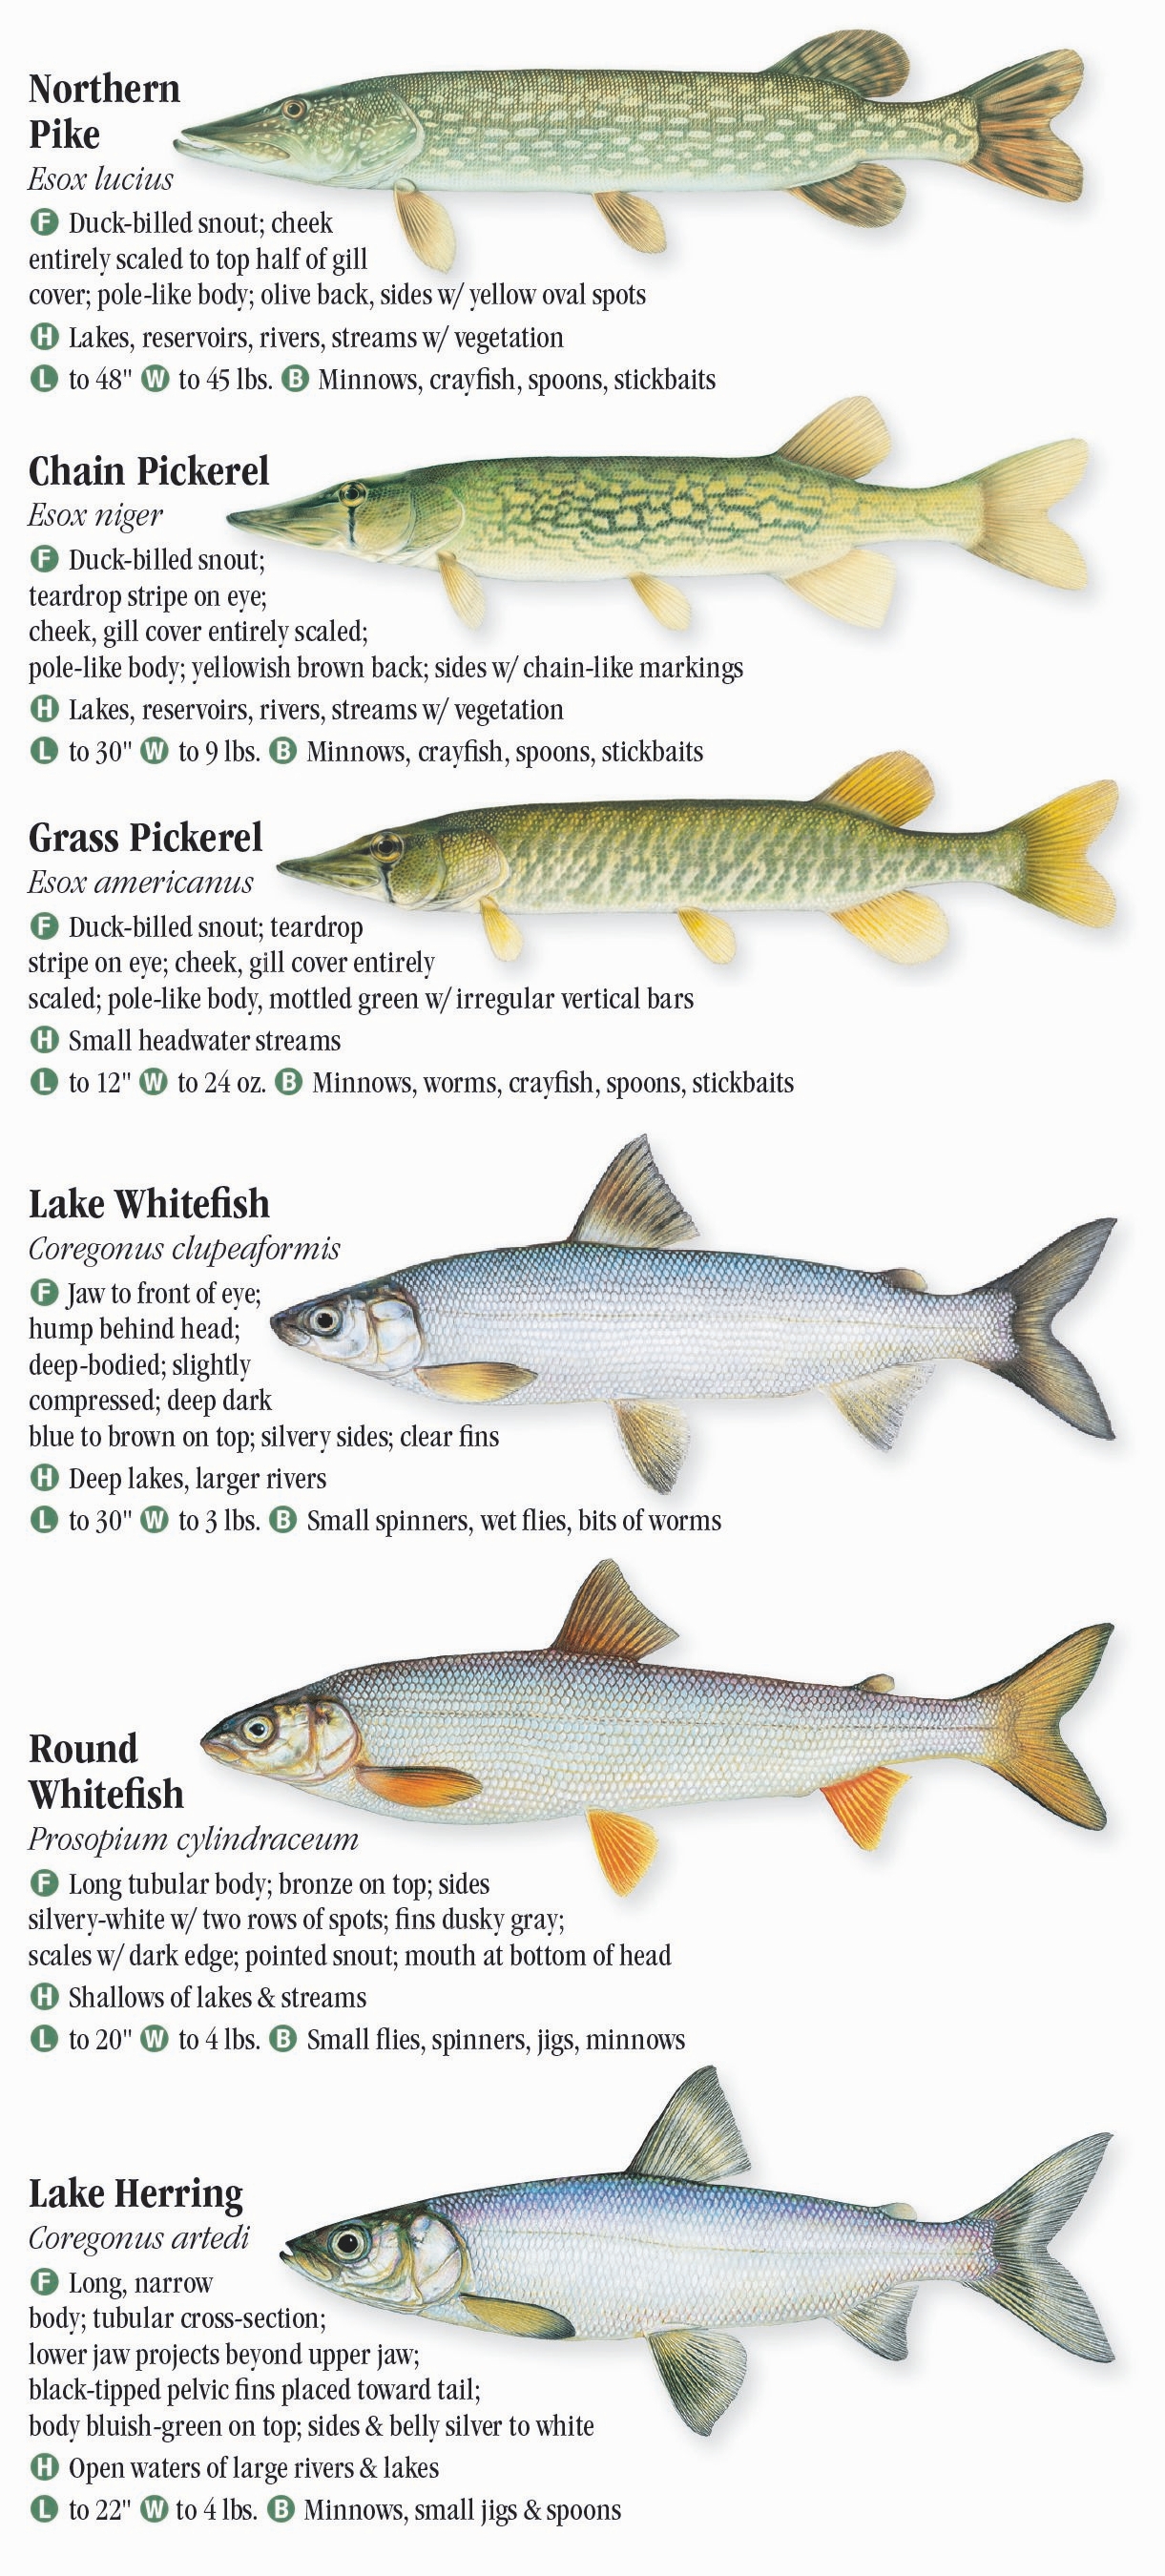 Fresh Water Fishes of the Great Lakes – Quick Reference Publishing